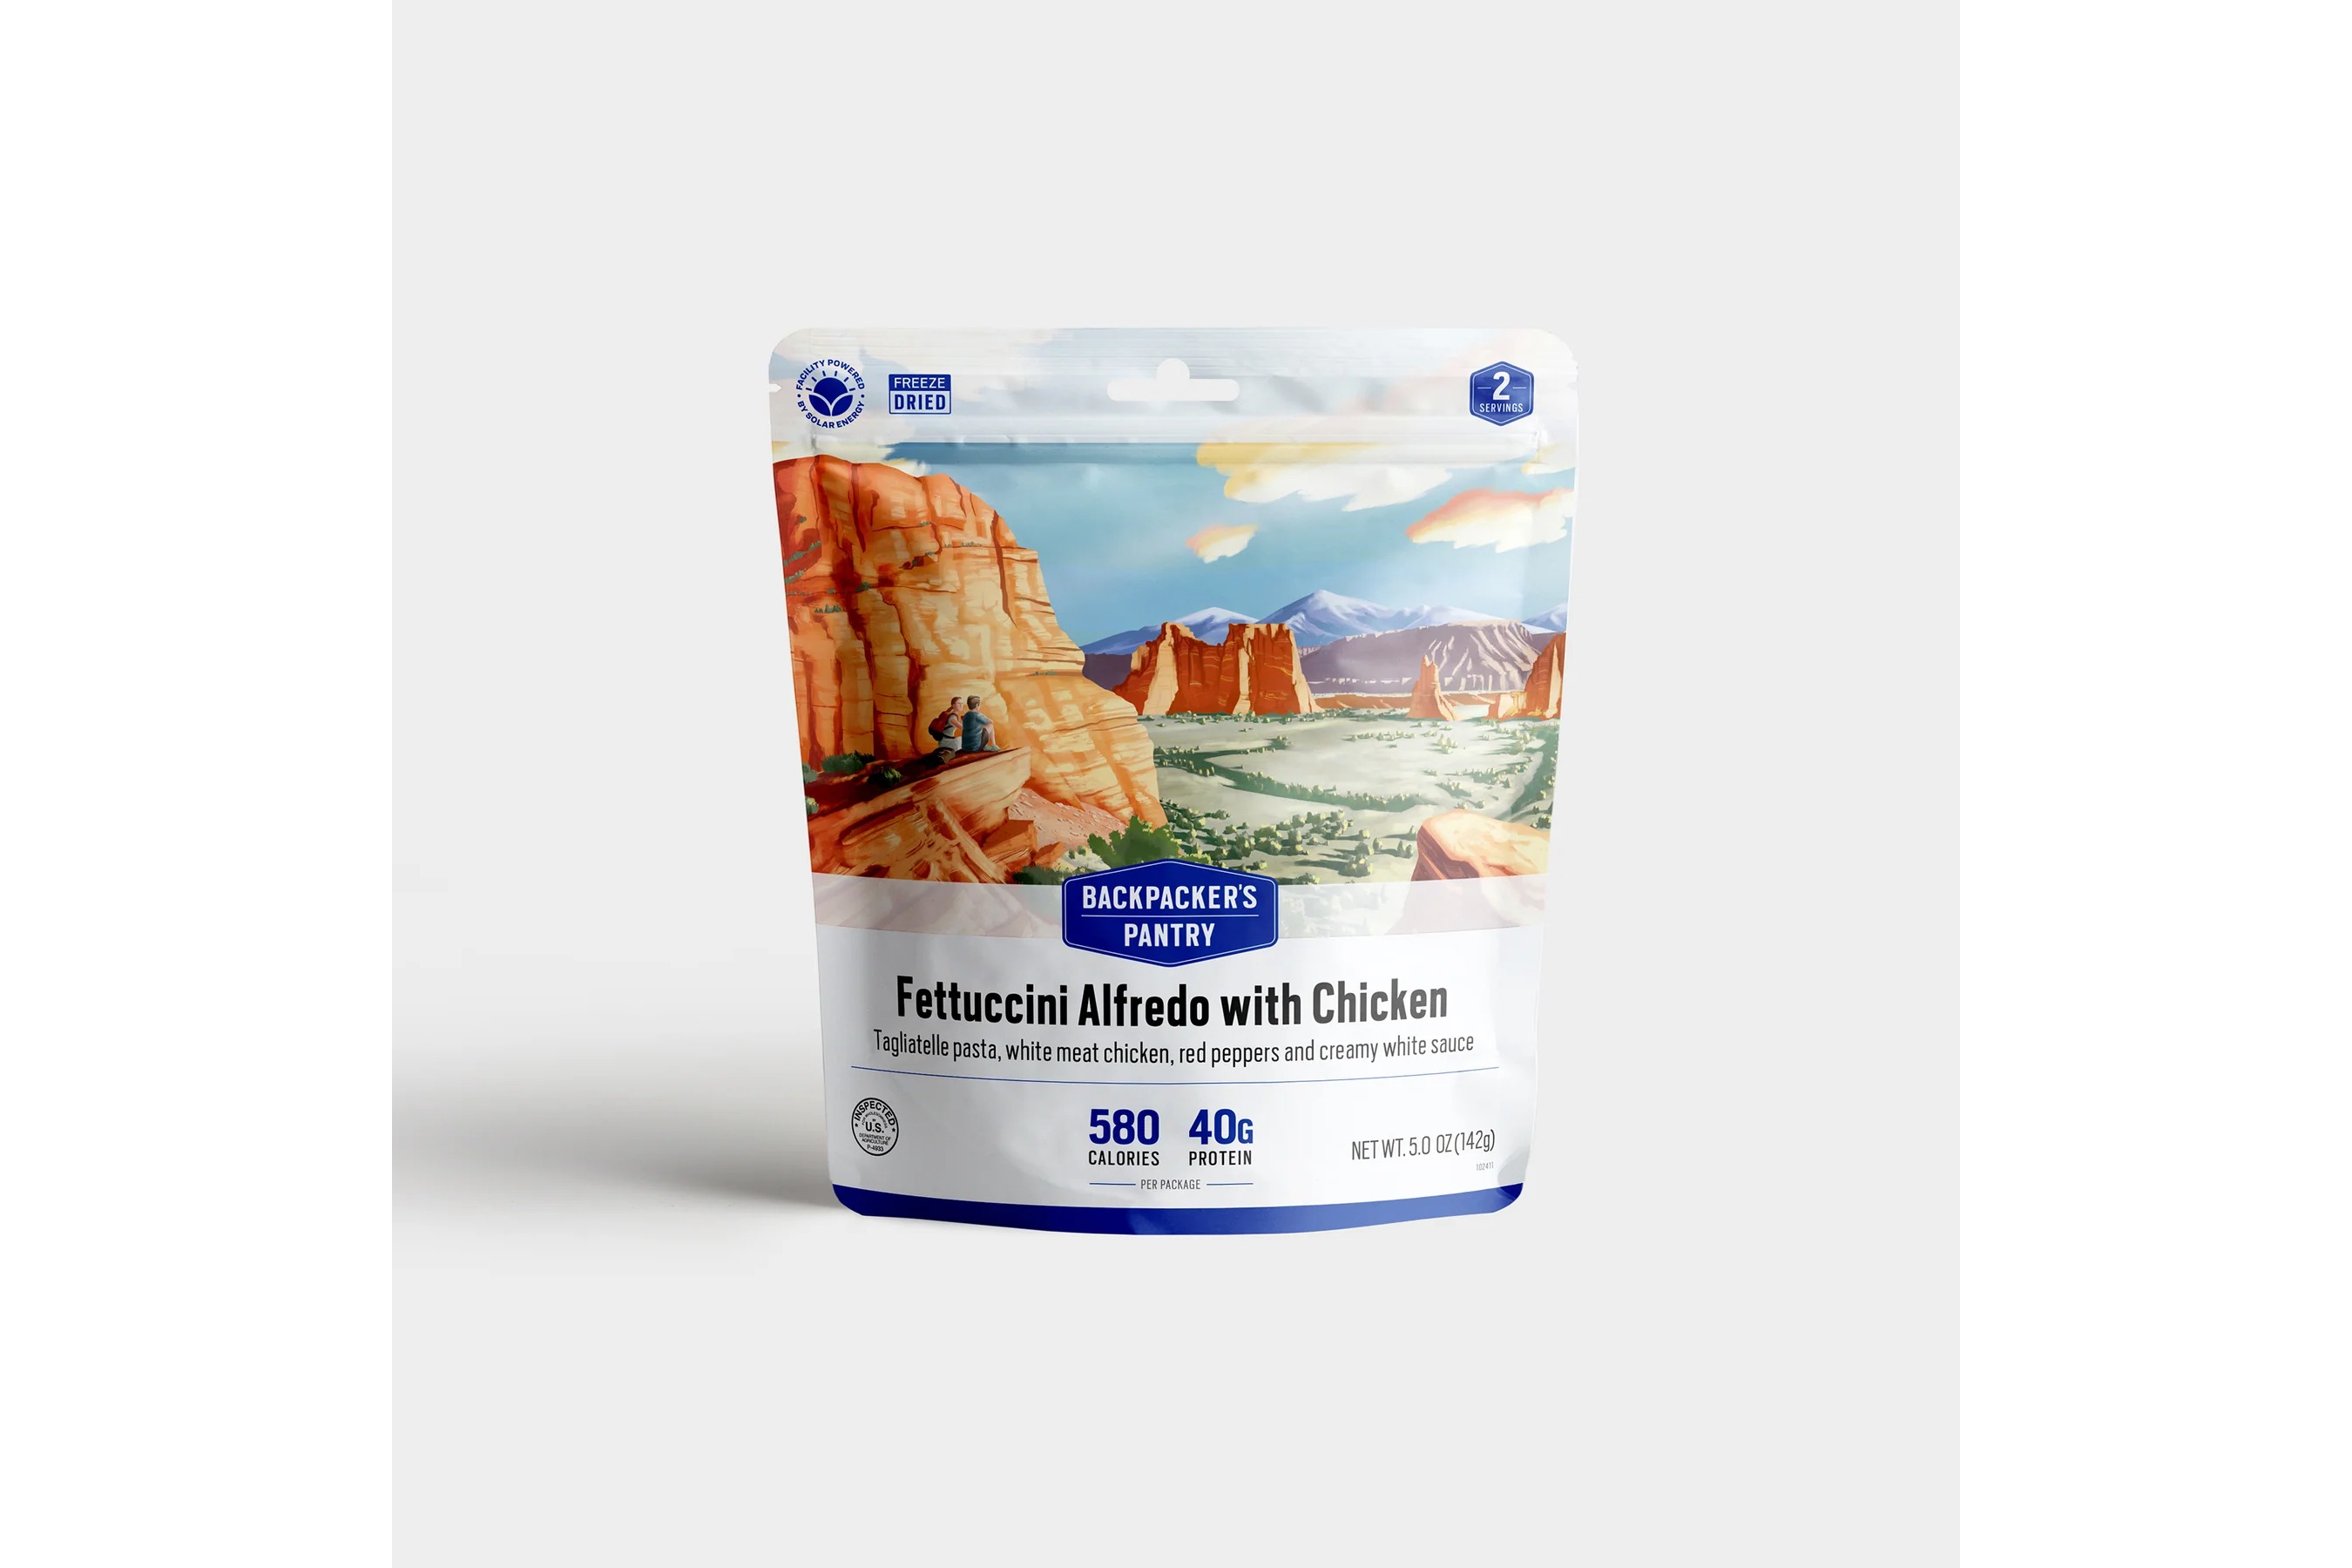 Backpackers Pantry Fettuccini Alfredo with Chicken 1 Serving